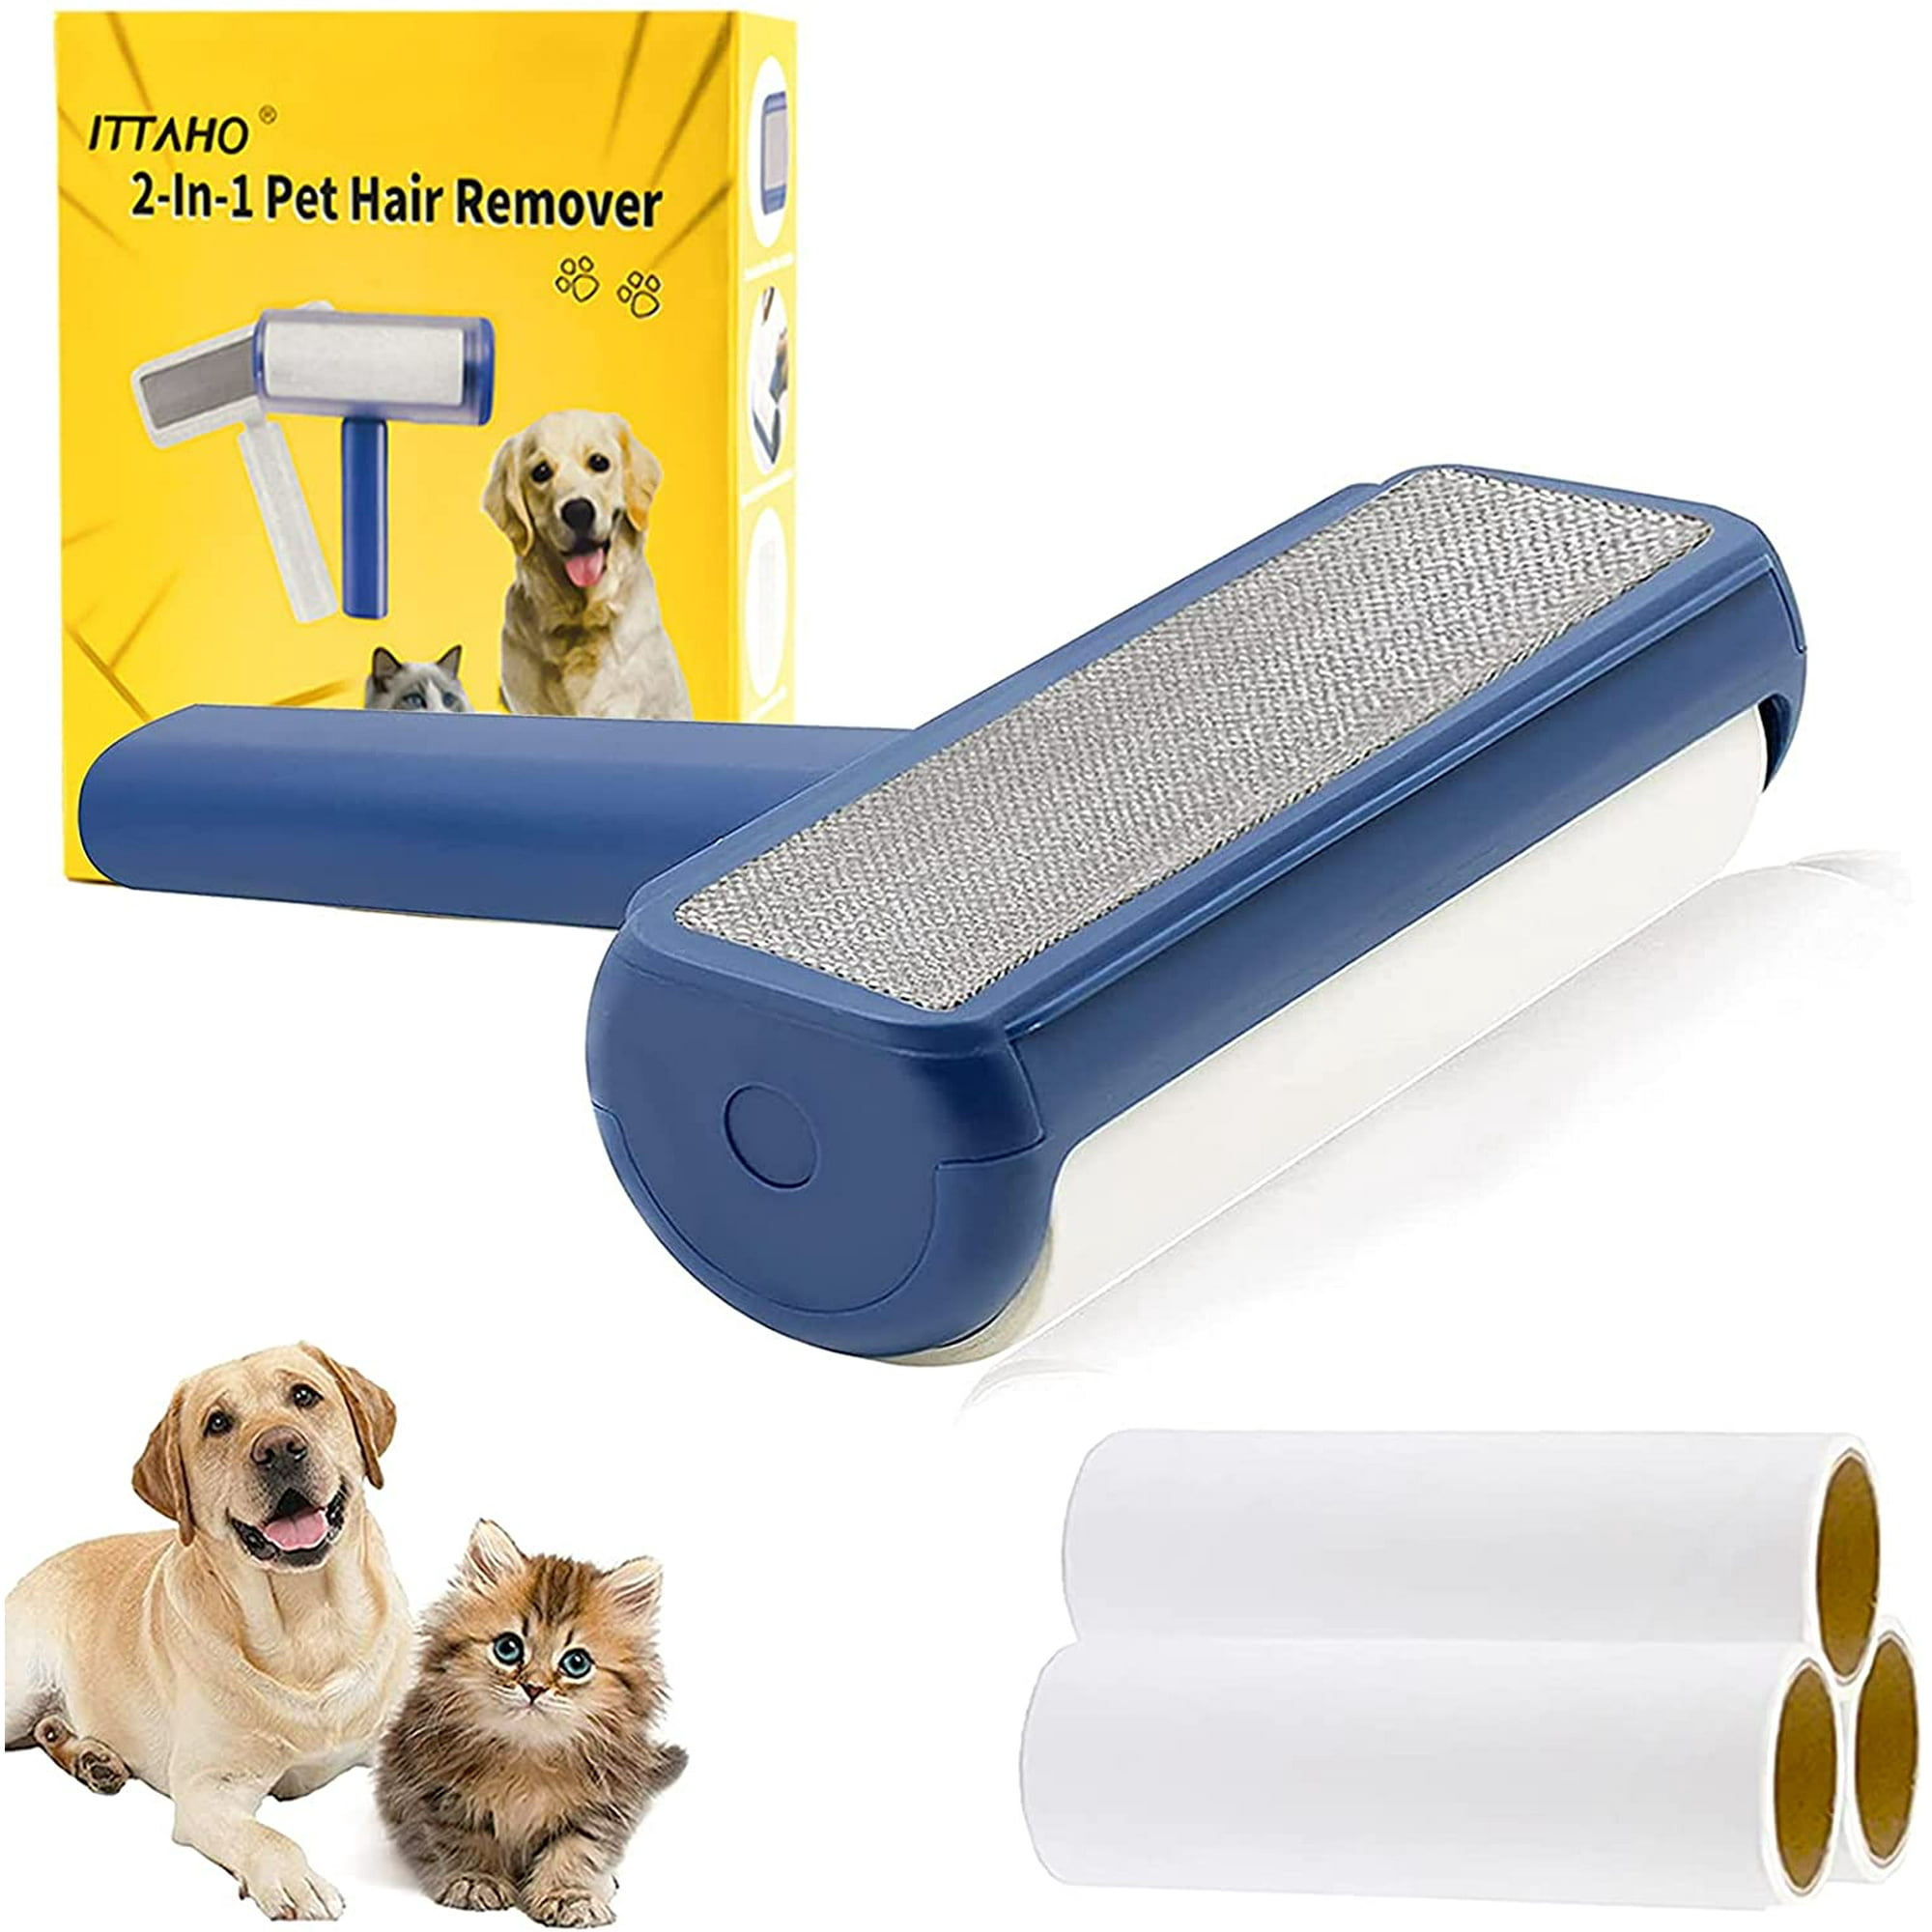 Pet Dog Cat Hair Roller Reusable Self Cleaning Animal Hair Removal Tool No  Adhesive Tape Needed Push Pull Lint Roller For| AliExpress | Pet Hair  Remover Roller Reusable Self Cleaning Dog Cat